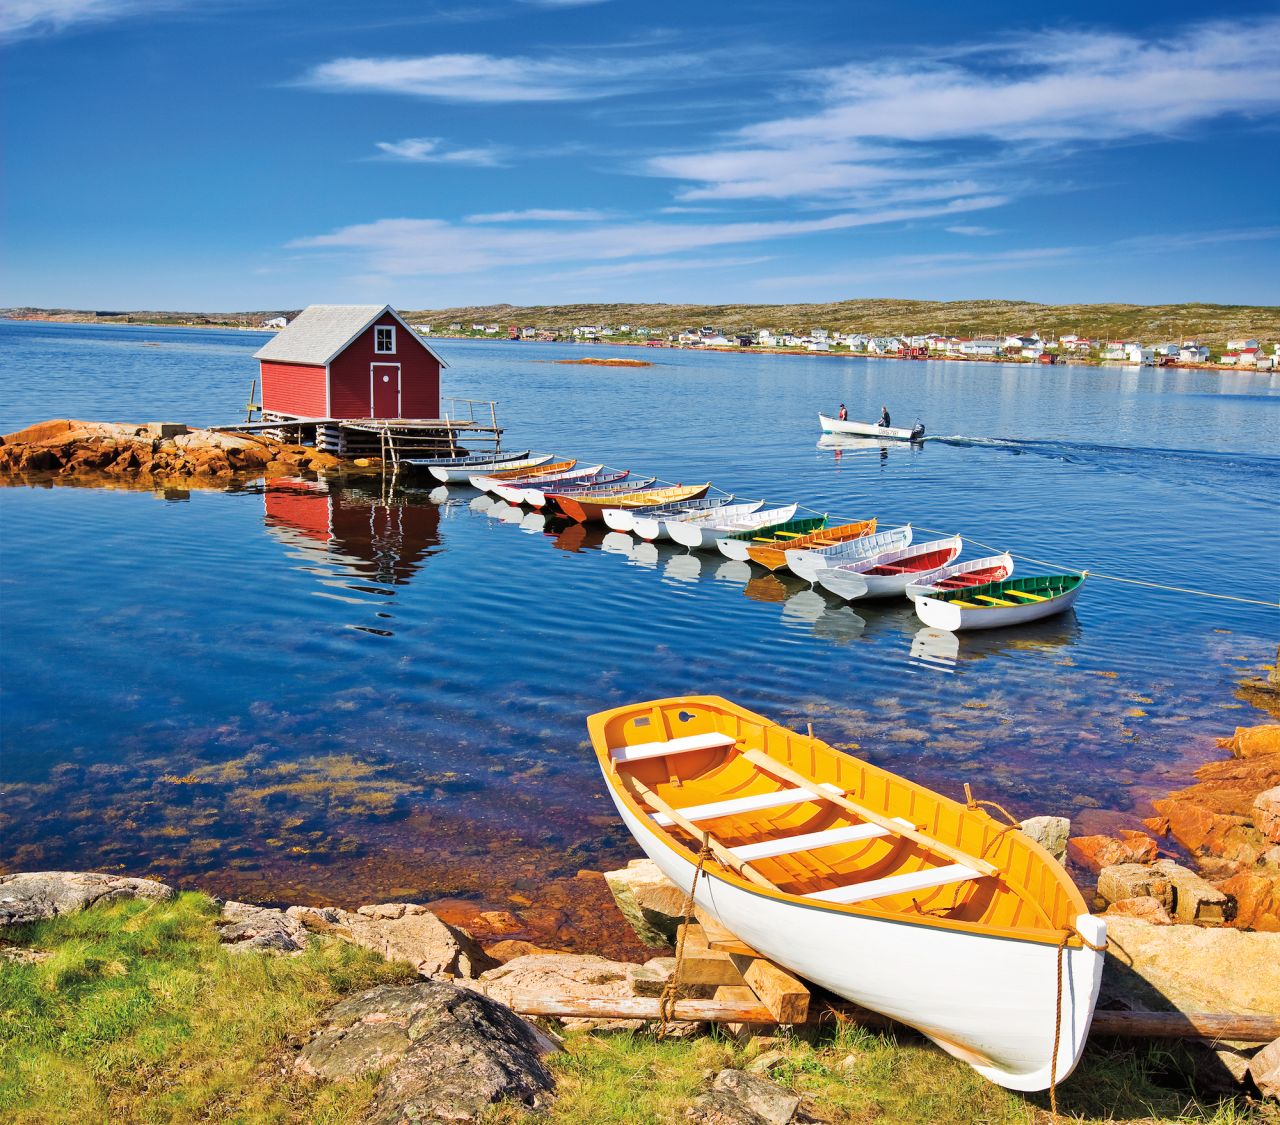 <strong>Fogo Island: </strong>For a traditional Newfoundland and Labrador fishing port experience, turn to Fogo Island. The largest island on Newfoundland and Labrador's vast coast, it's home to 11 <a href="http://www.townoffogoisland.ca/home/2" target="_blank" target="_blank">communities and was first settled by the Irish in the 18th century. </a>